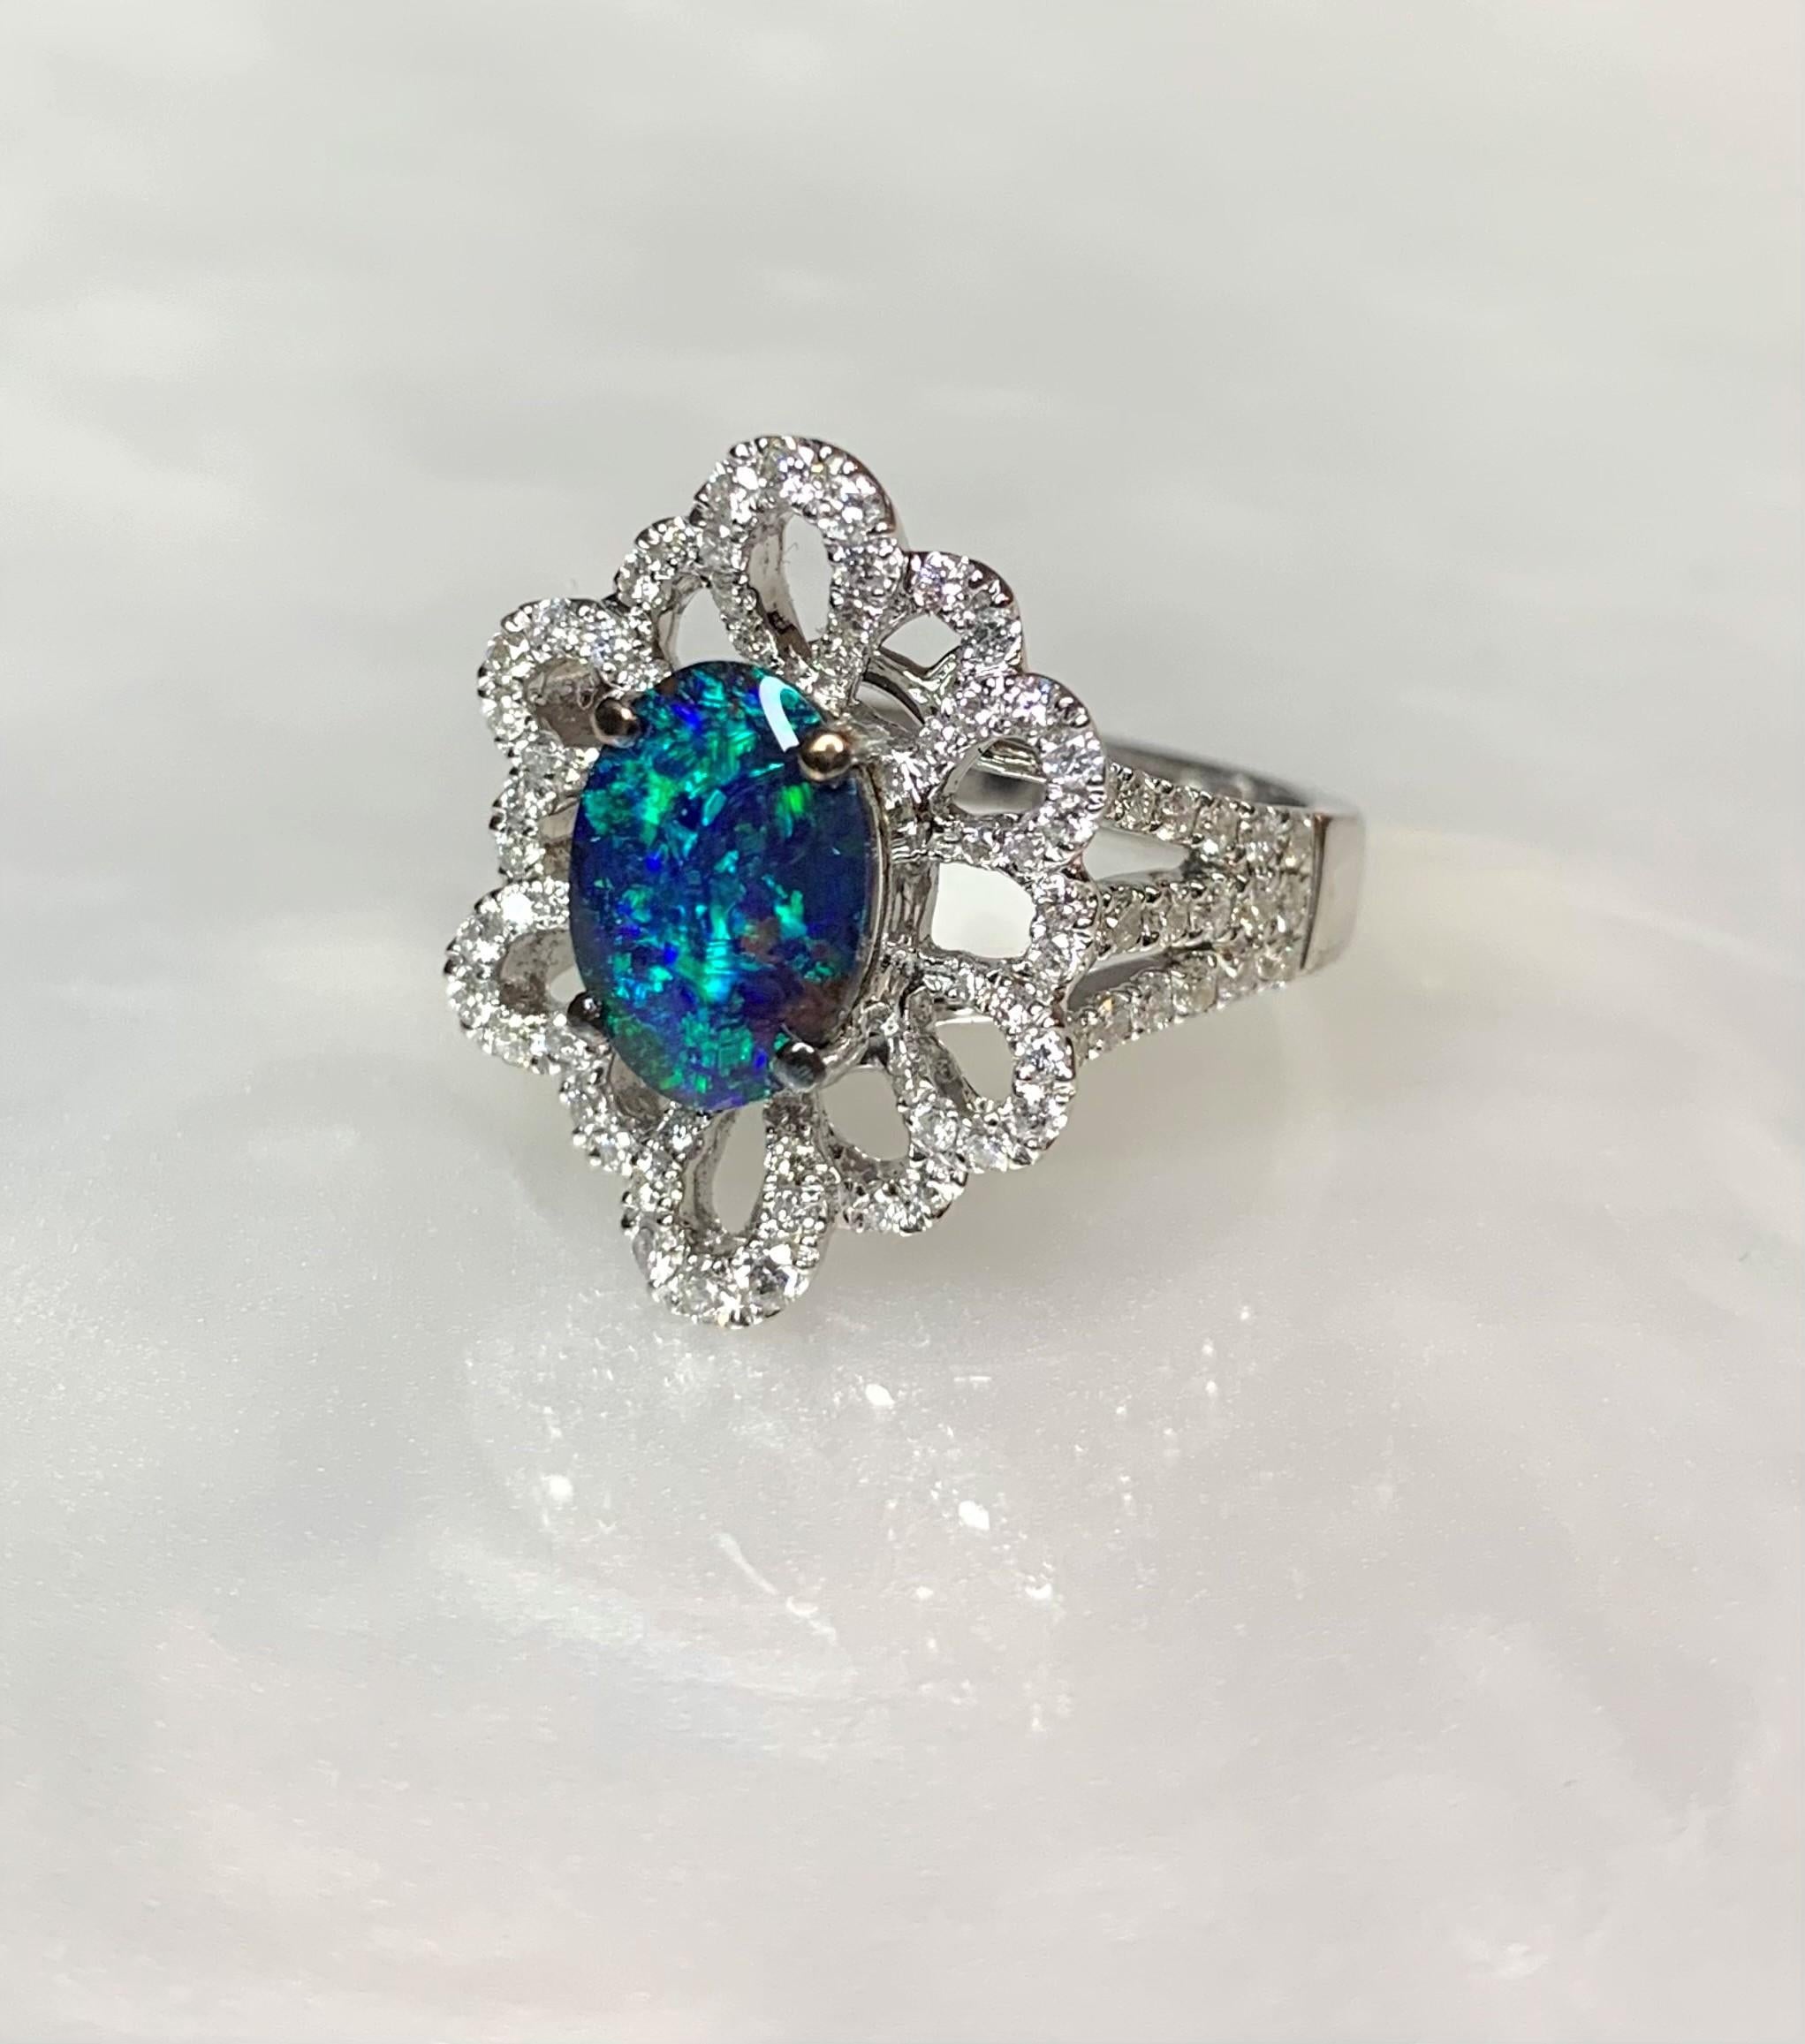 A phenomenal Australian black opal ring boasting a glowing blue-green oval center stone weighing 4.86 surrounded by exceptional sparkling white diamonds weighing 1.82 carats. Final call on this exquisite collector's dream.

*Approximate stone